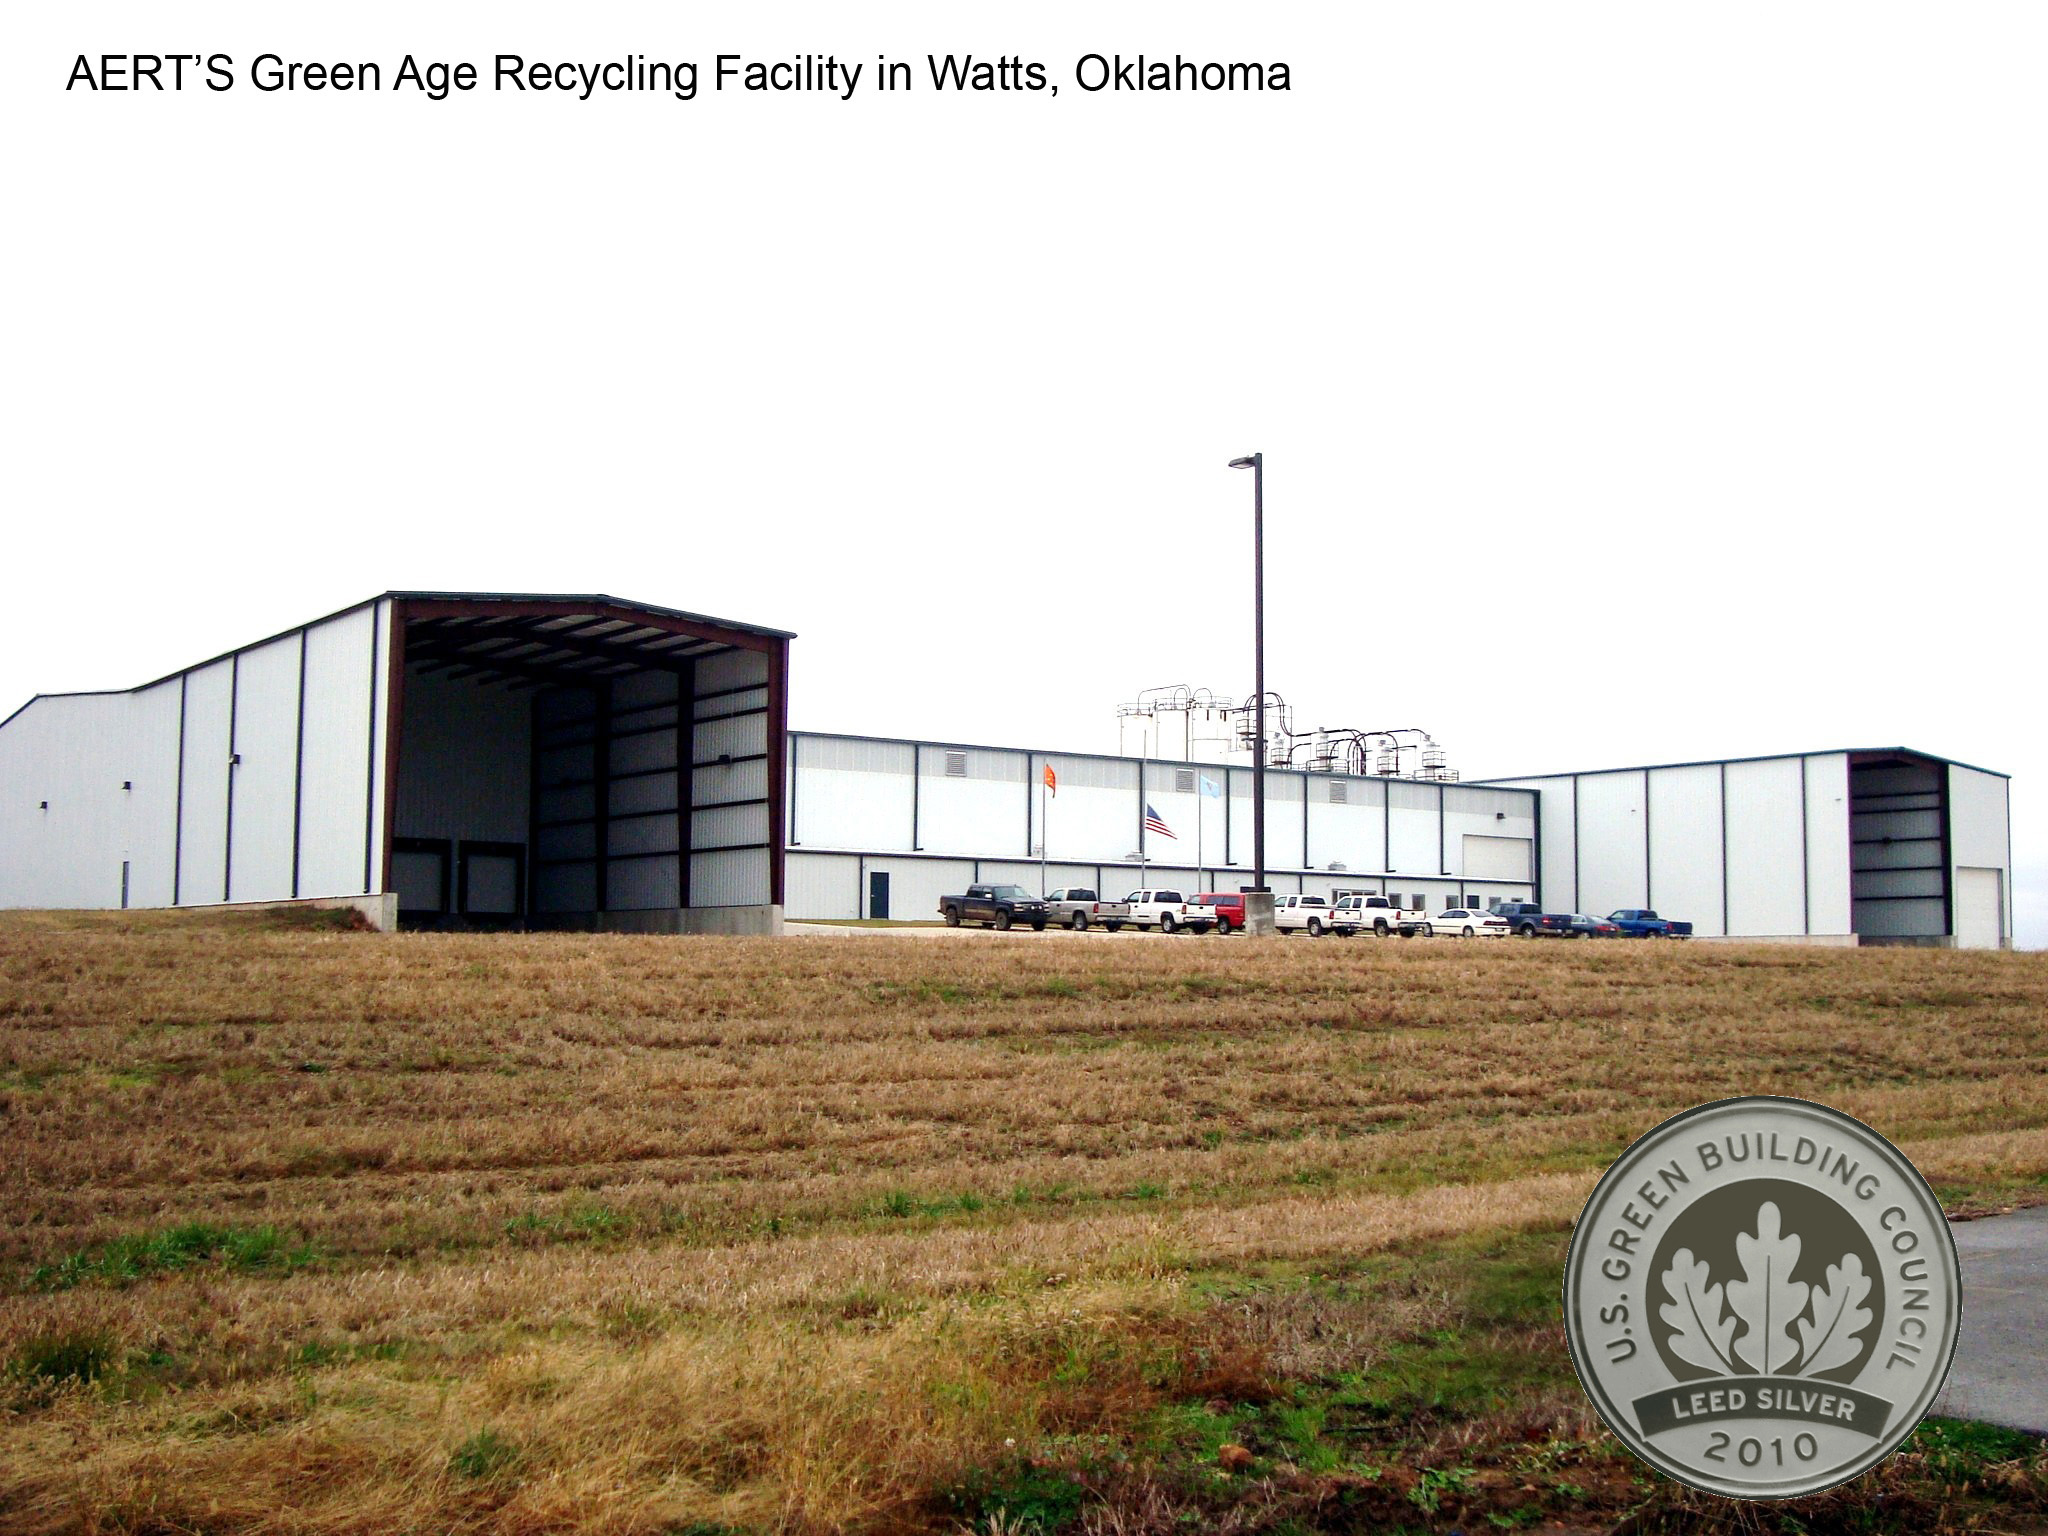 AERT's LEED Certified Green Age Recycling Facility in Watts, OK